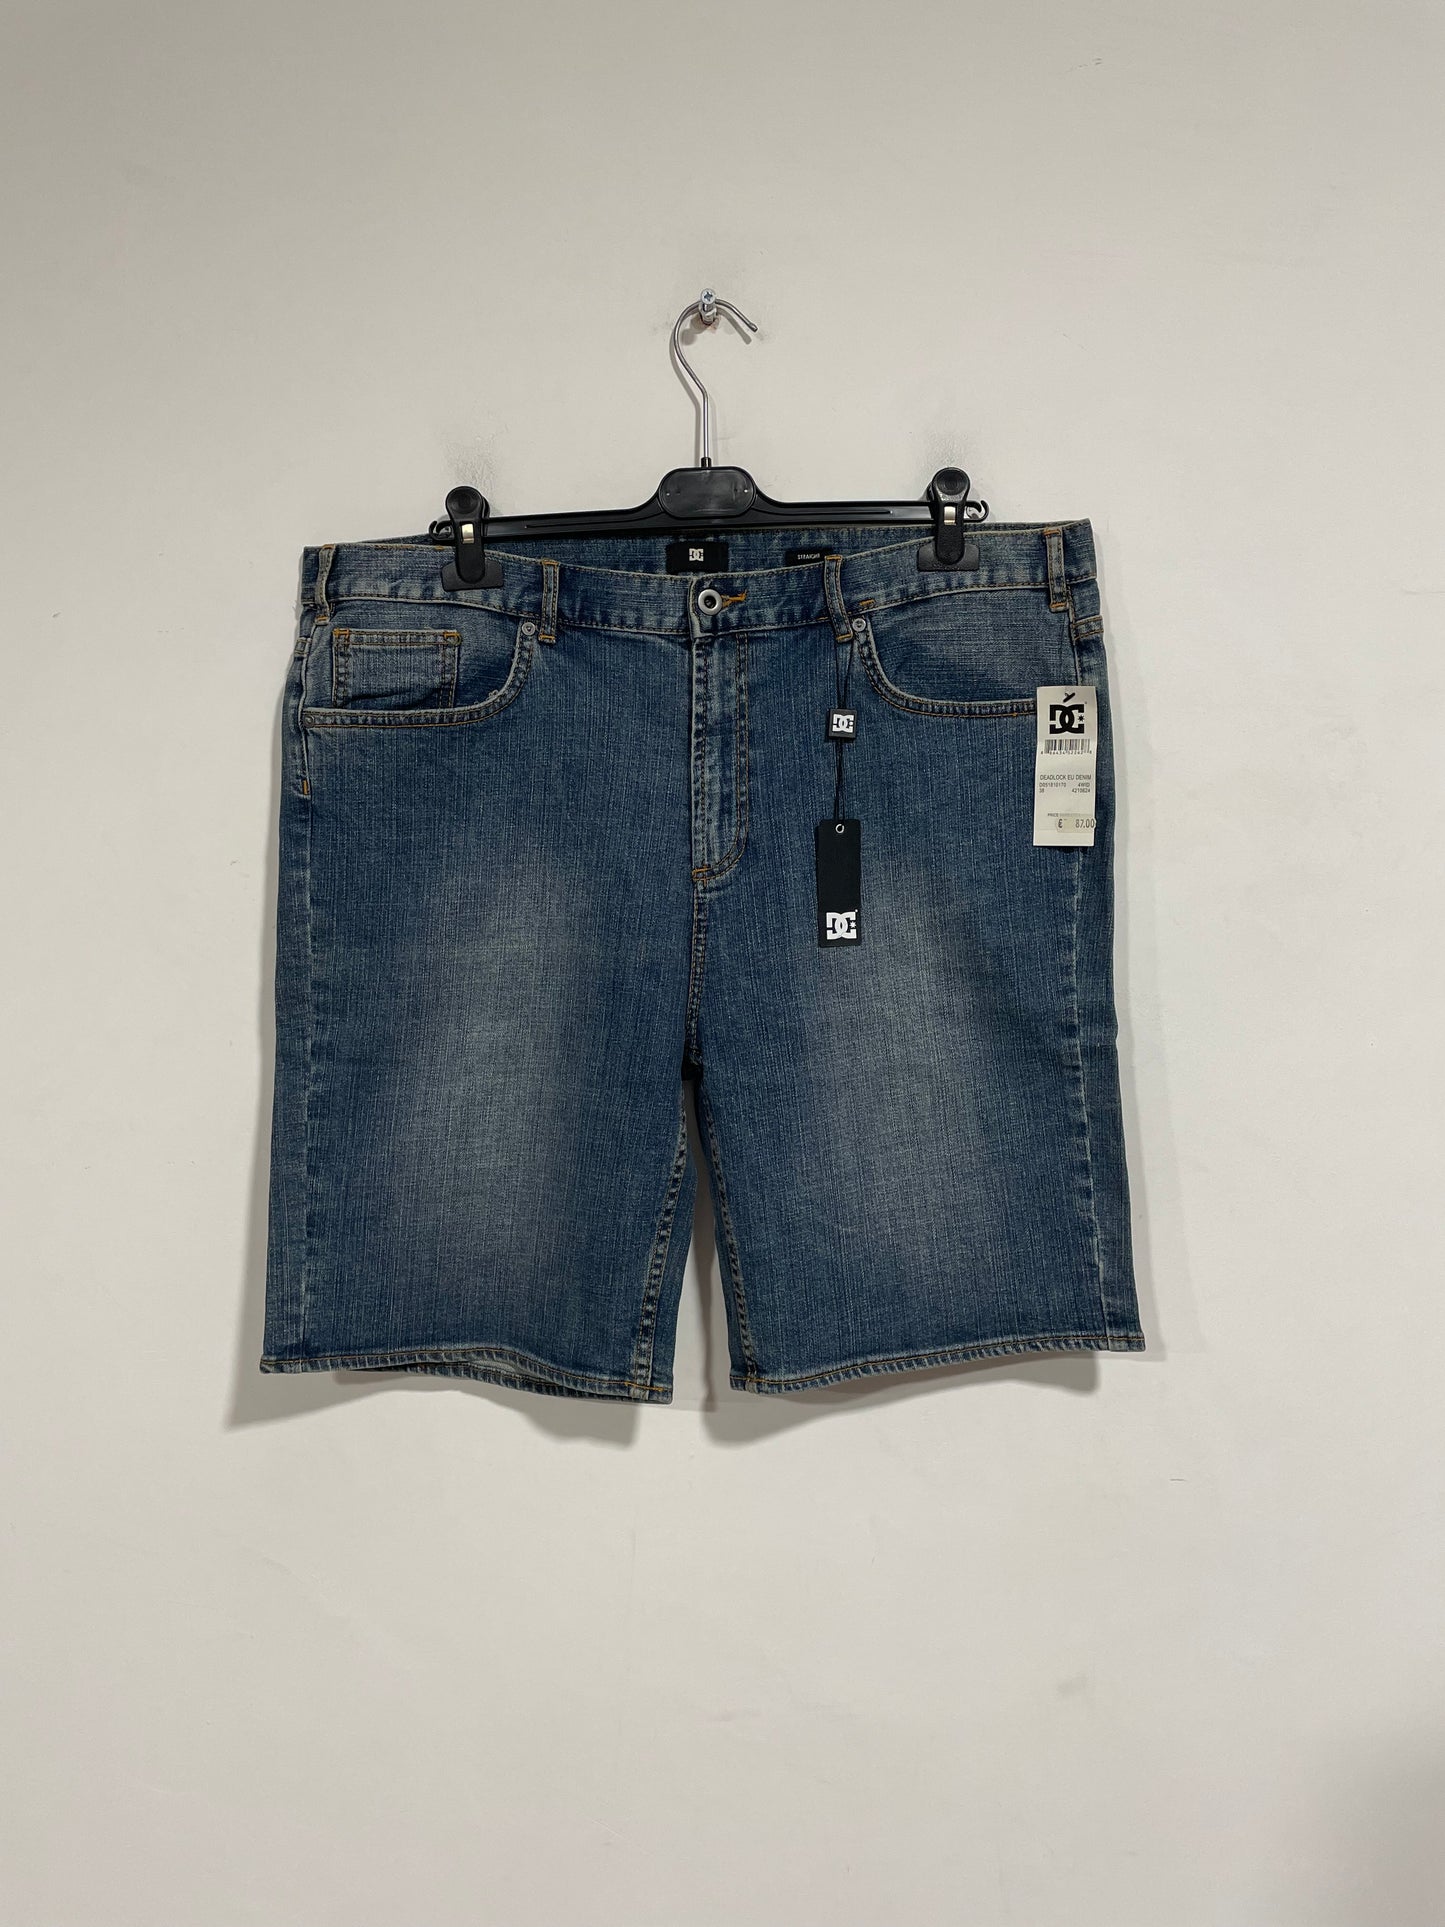 Shorts DC shoes nuovo con cartellino (D698)